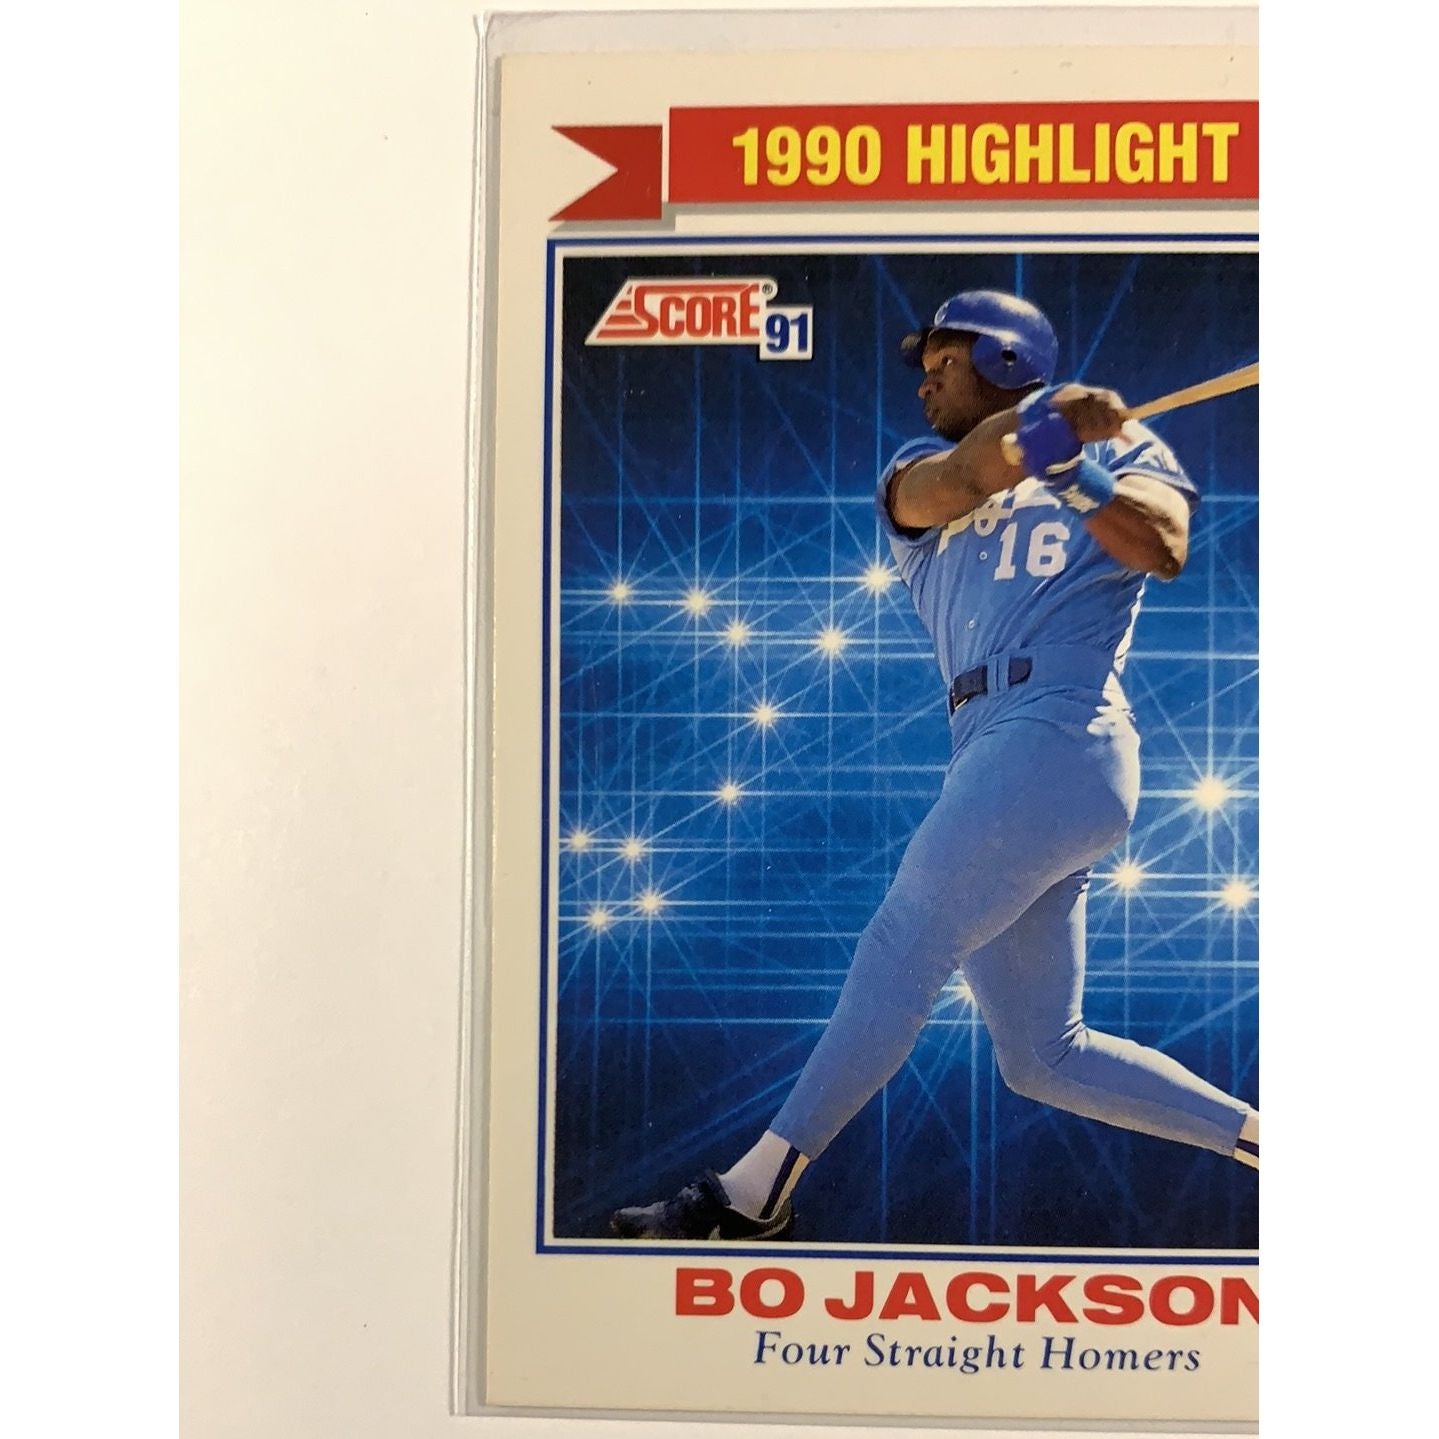  1991 Score Bo Jackson Four Straight Homers Highlight Card  Local Legends Cards & Collectibles